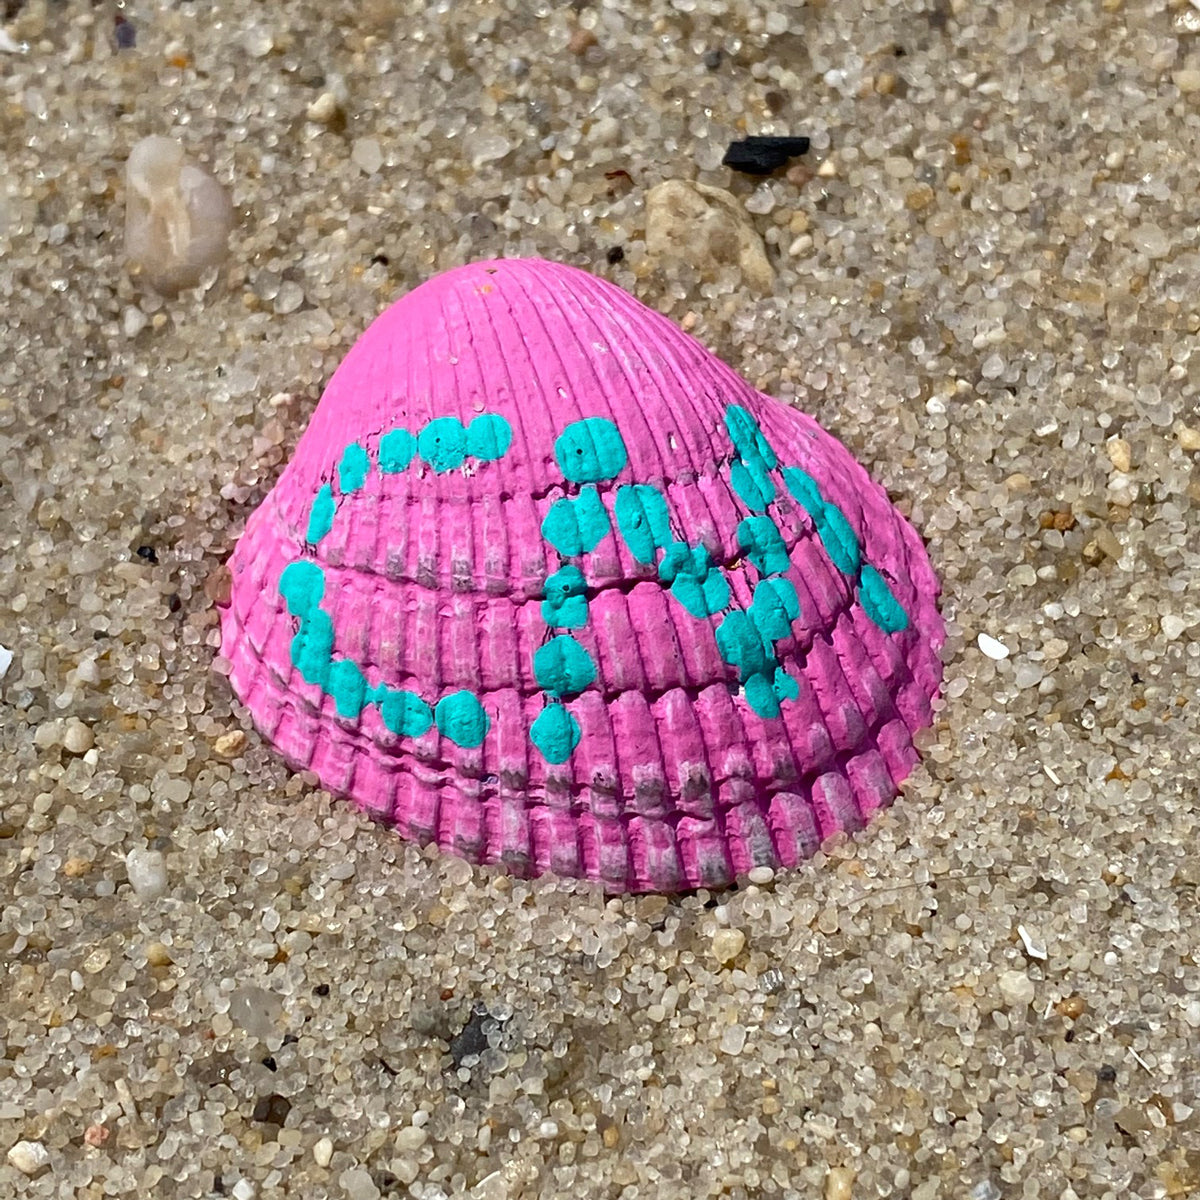 CM Shell - Blue Dots on Pink